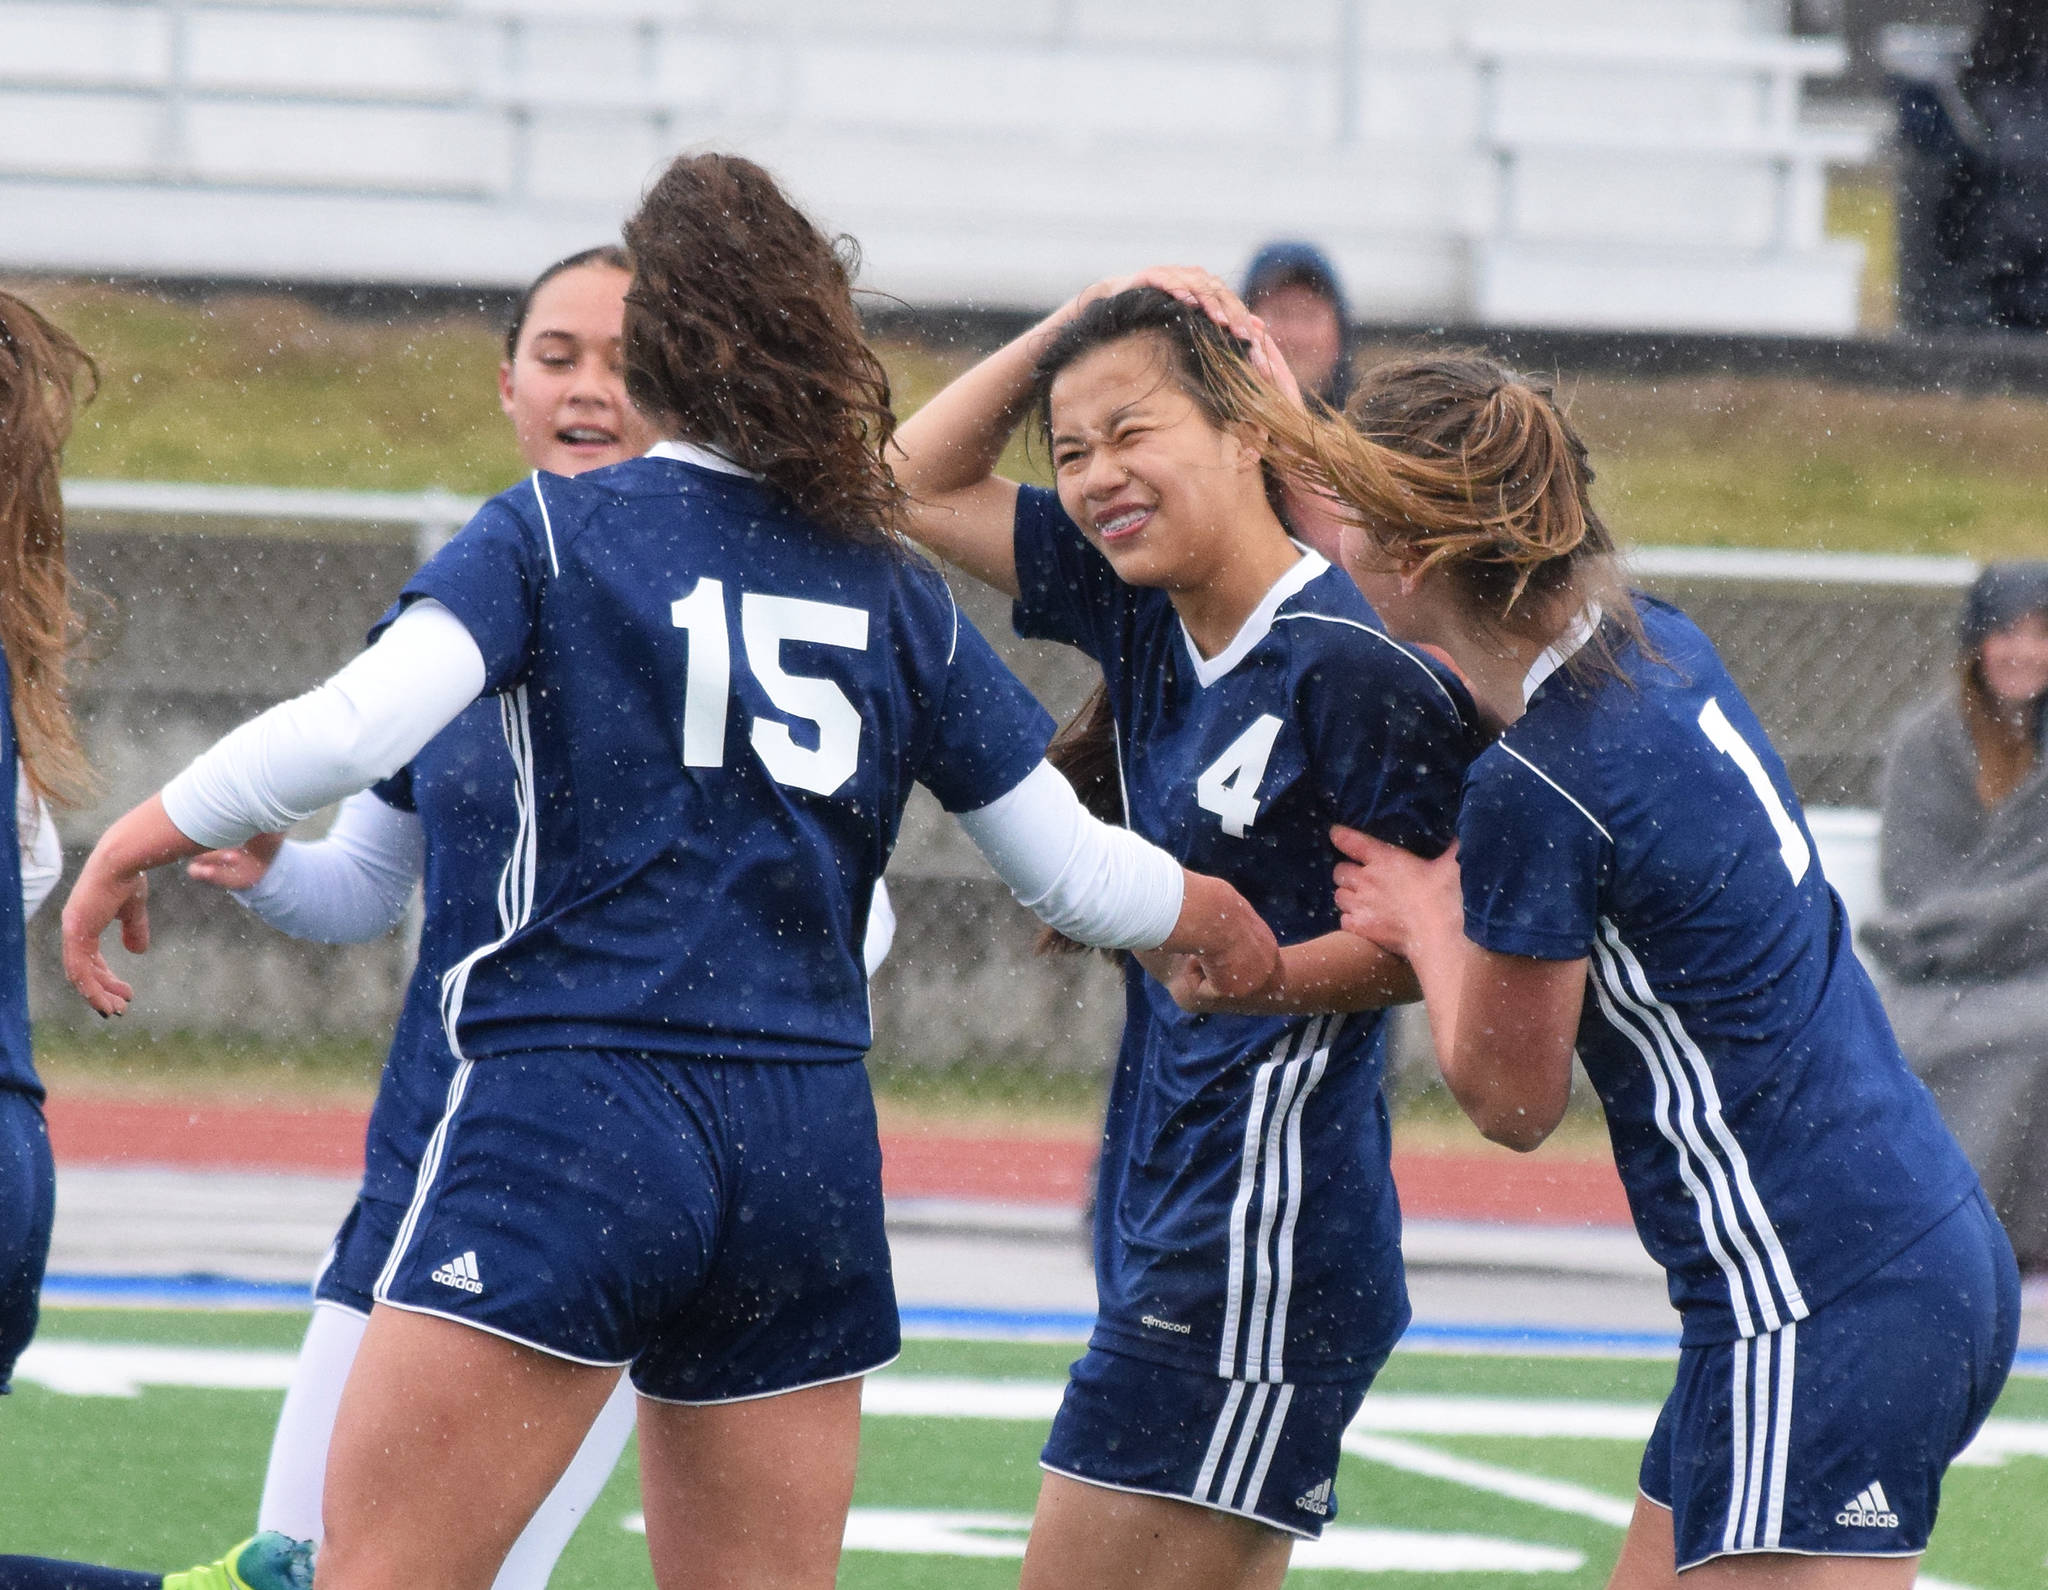 Soldotna’s Meijan Leaf (4) receives congratulations from teammates after scoring a goal against Homer Saturday, May 11, 2019, in a Peninsula Conference game in Soldotna, Alaska. (Photo by Joey Klecka/Peninsula Clarion)